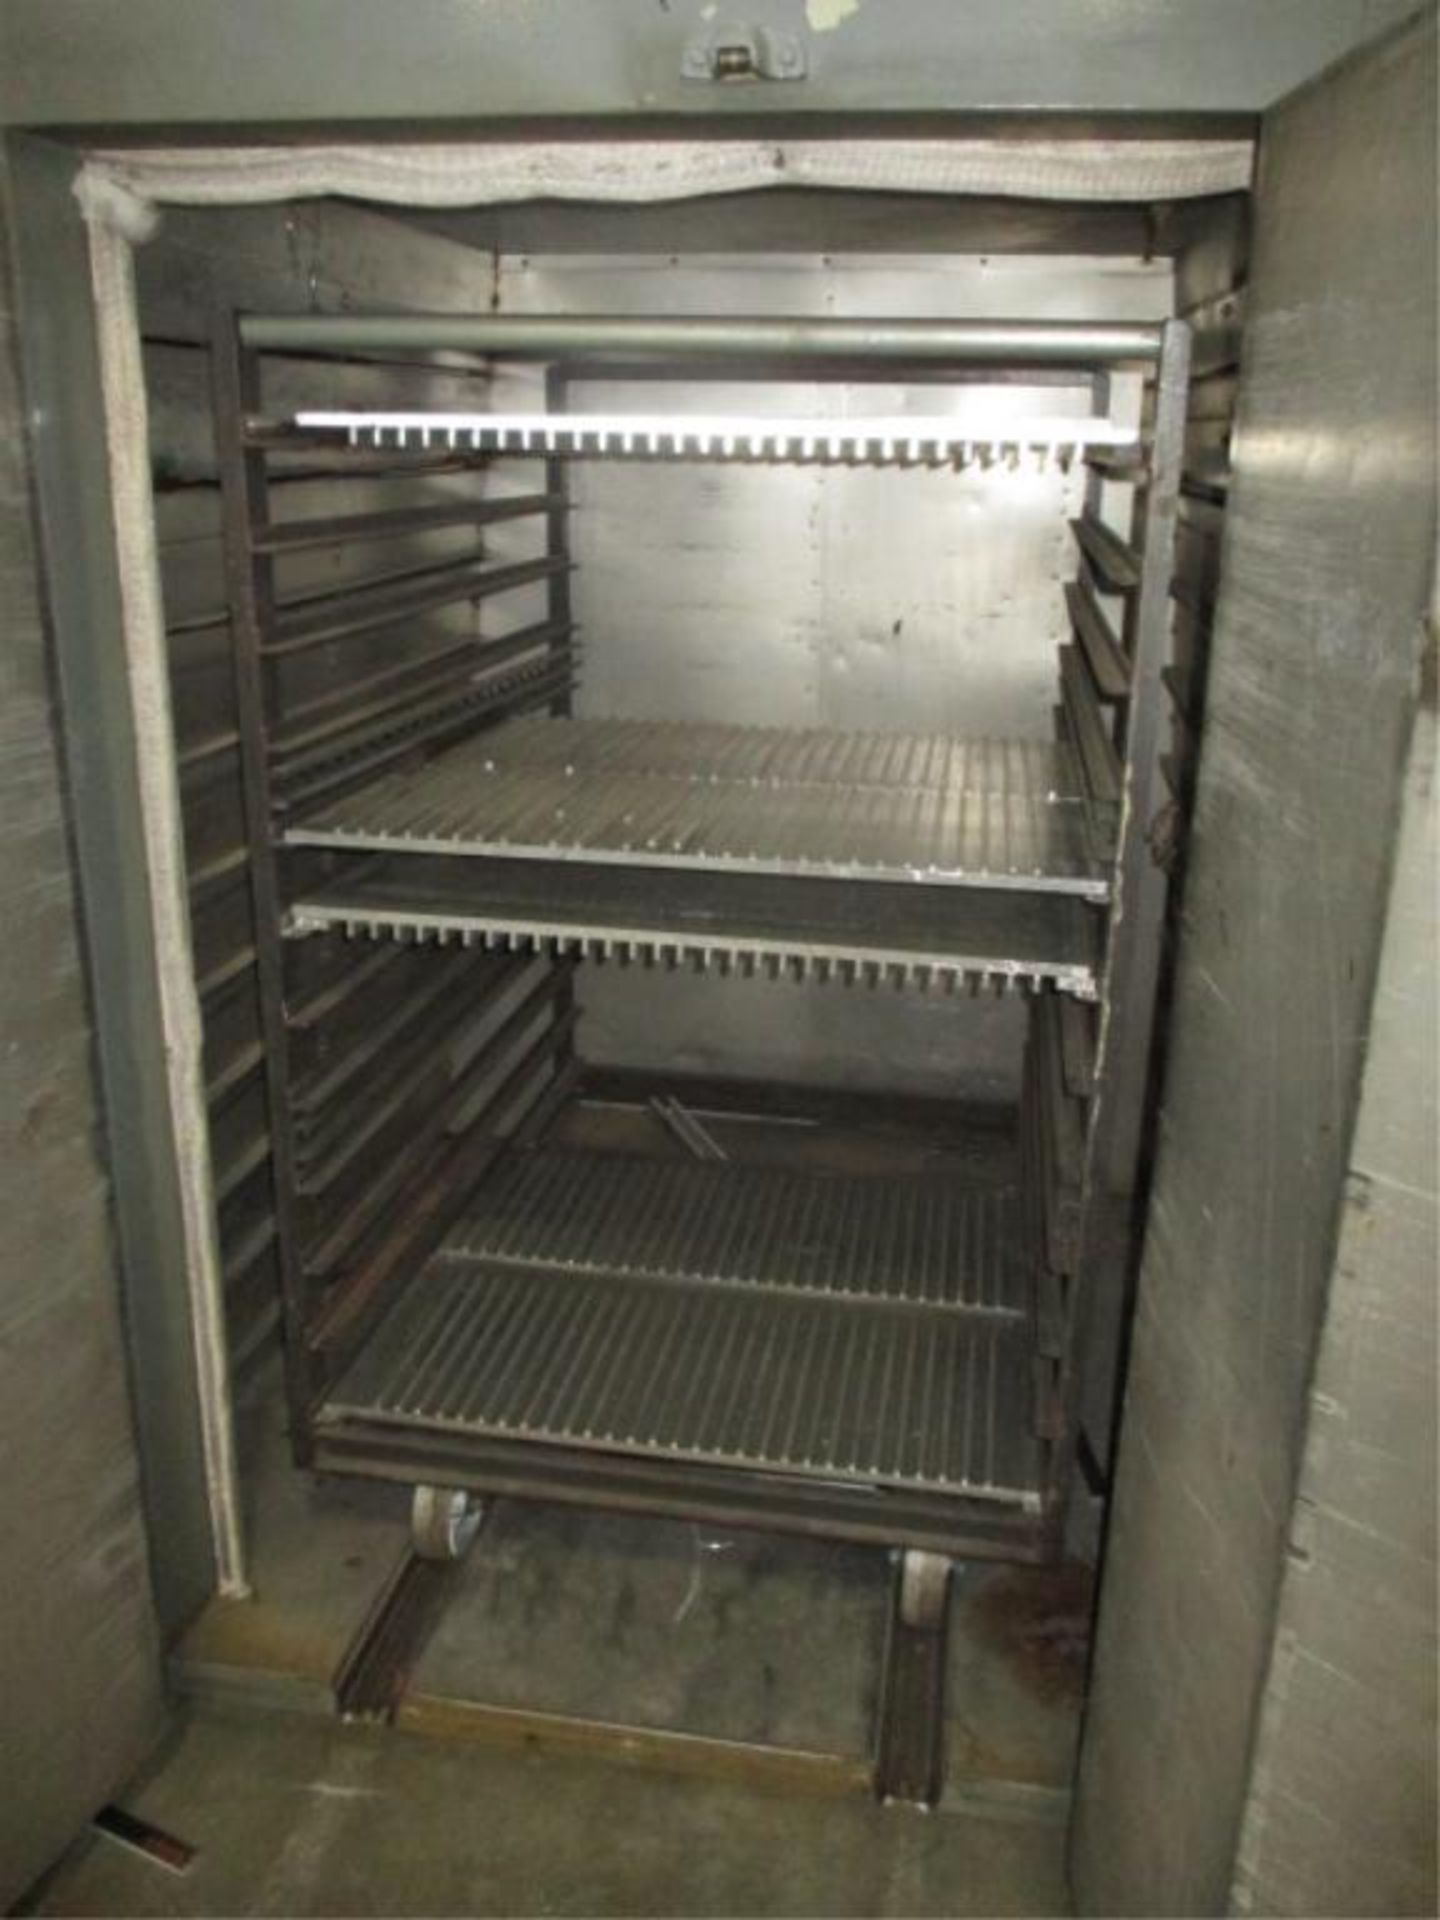 Despatch Drying Oven - Image 2 of 5